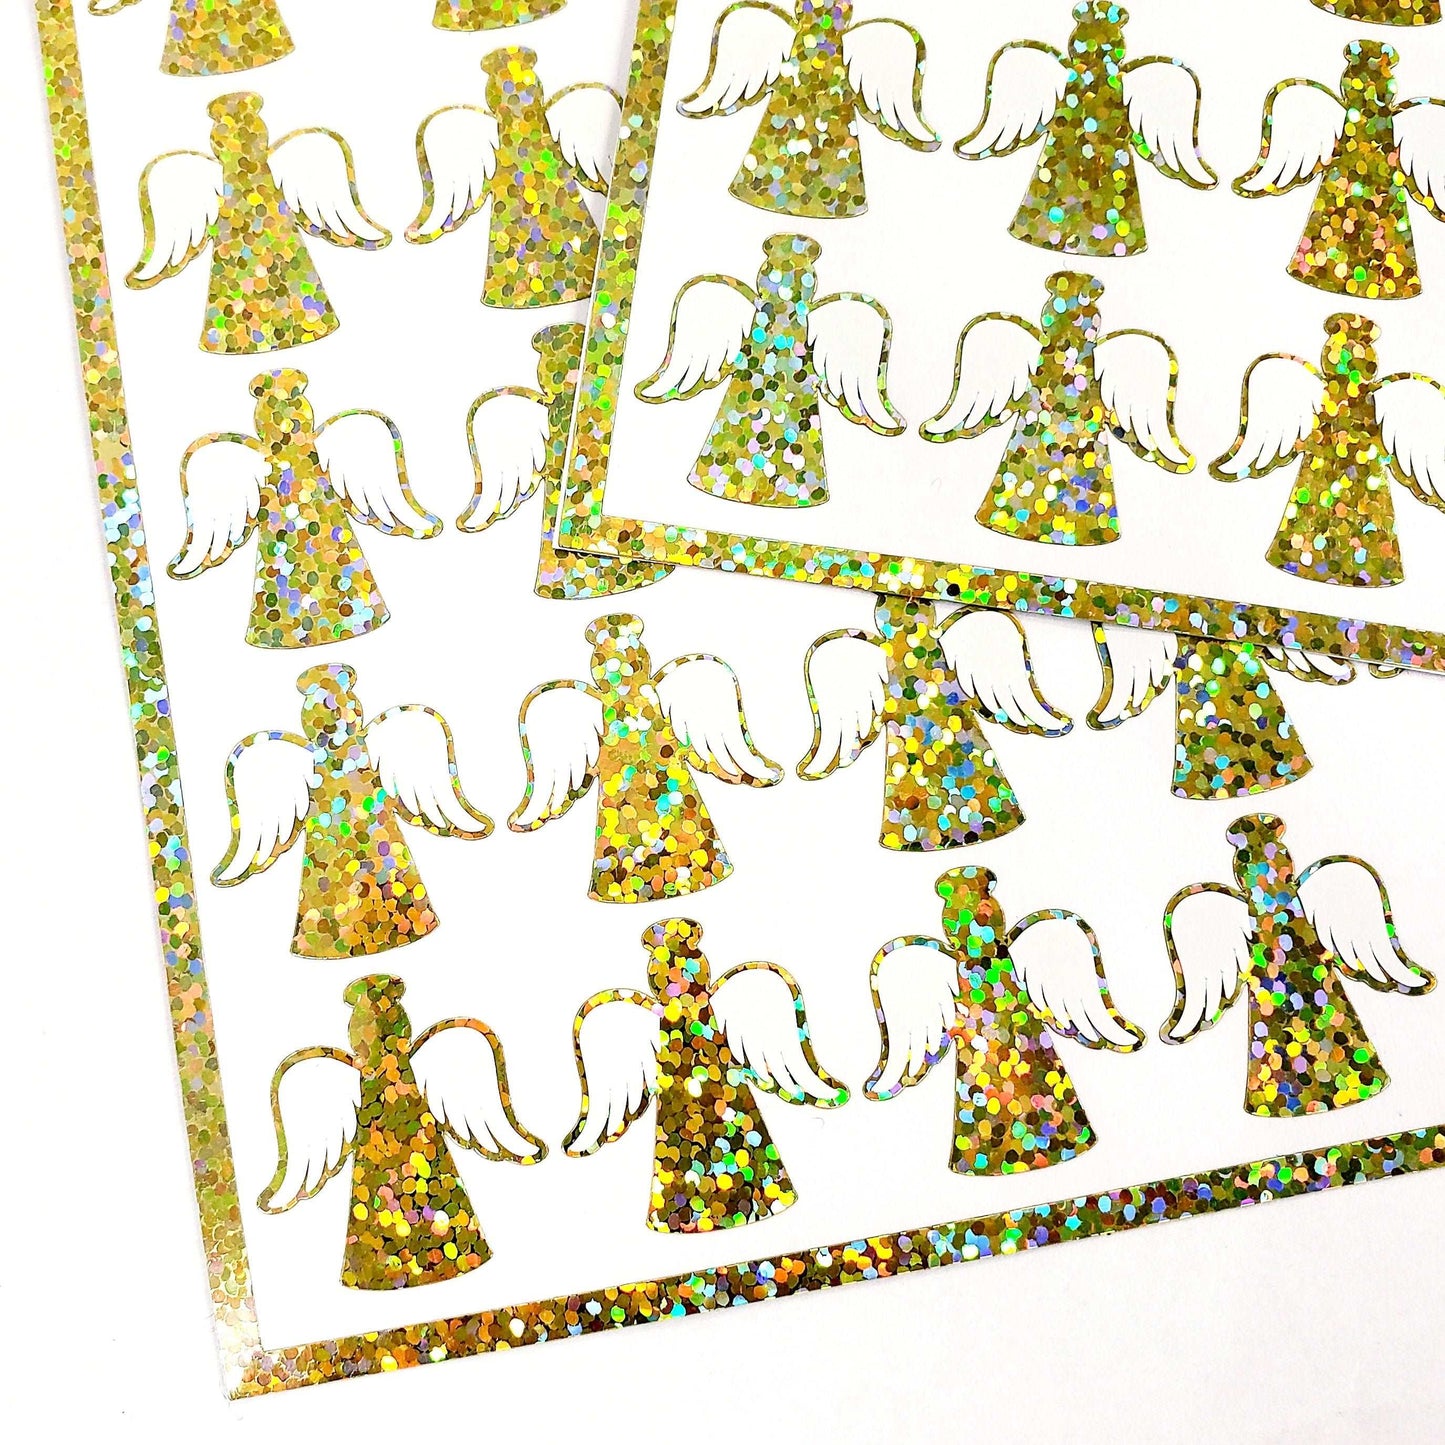 Gold Angels Stickers, set of 30 white and gold angel stickers for invitations, envelopes, memorial cards, planners, journals and crafts.